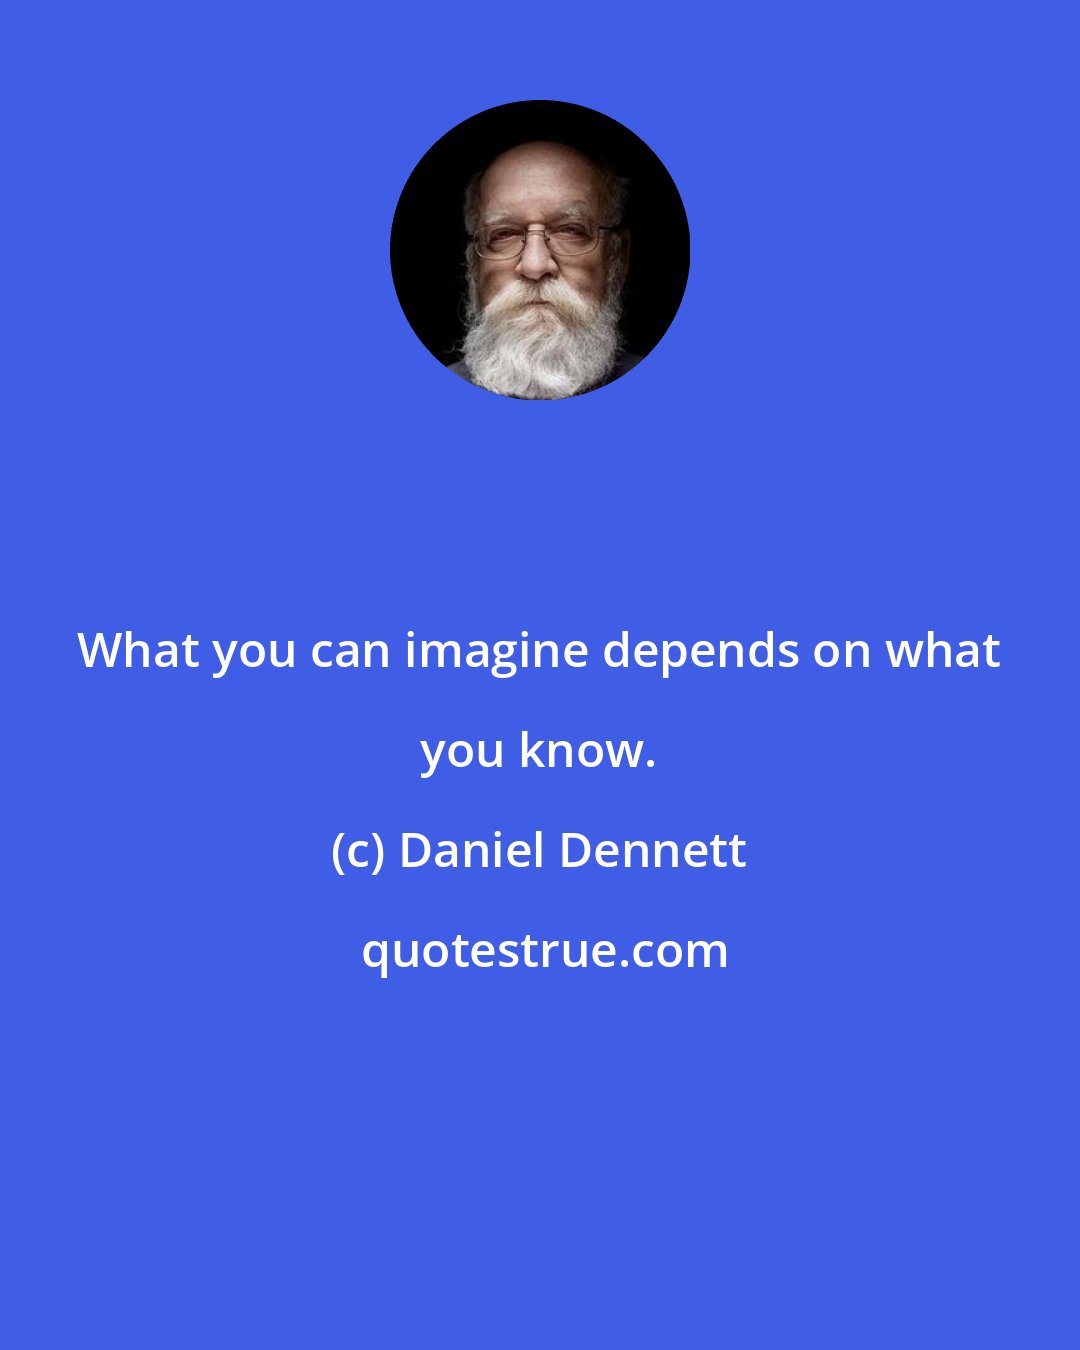 Daniel Dennett: What you can imagine depends on what you know.